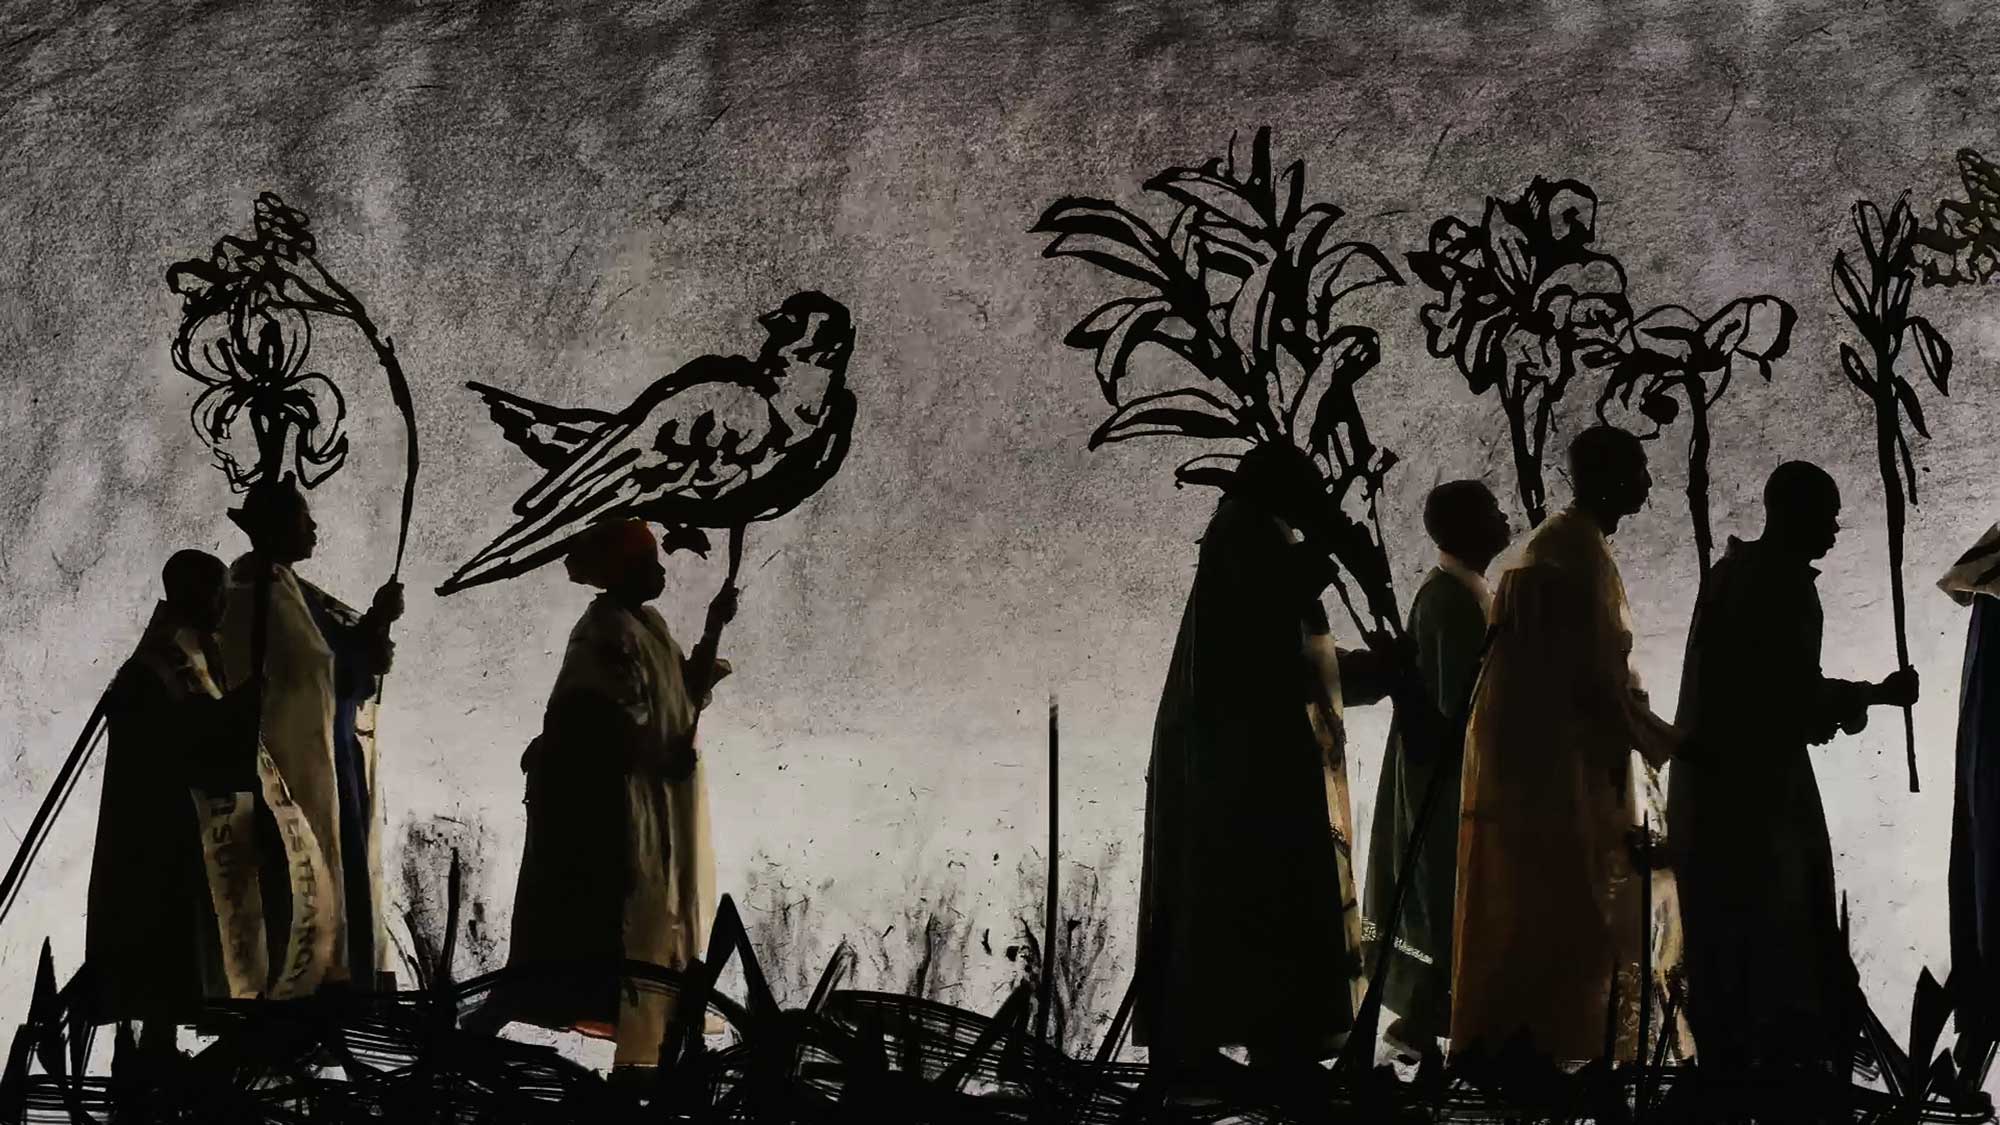 William Kentridge. More Sweetly Play The Dance, 2015. Eight channel HD film installation, four megaphones, 15 minutes. Courtesy Maja Hoffmann / LUMA Foundation collection and the artist